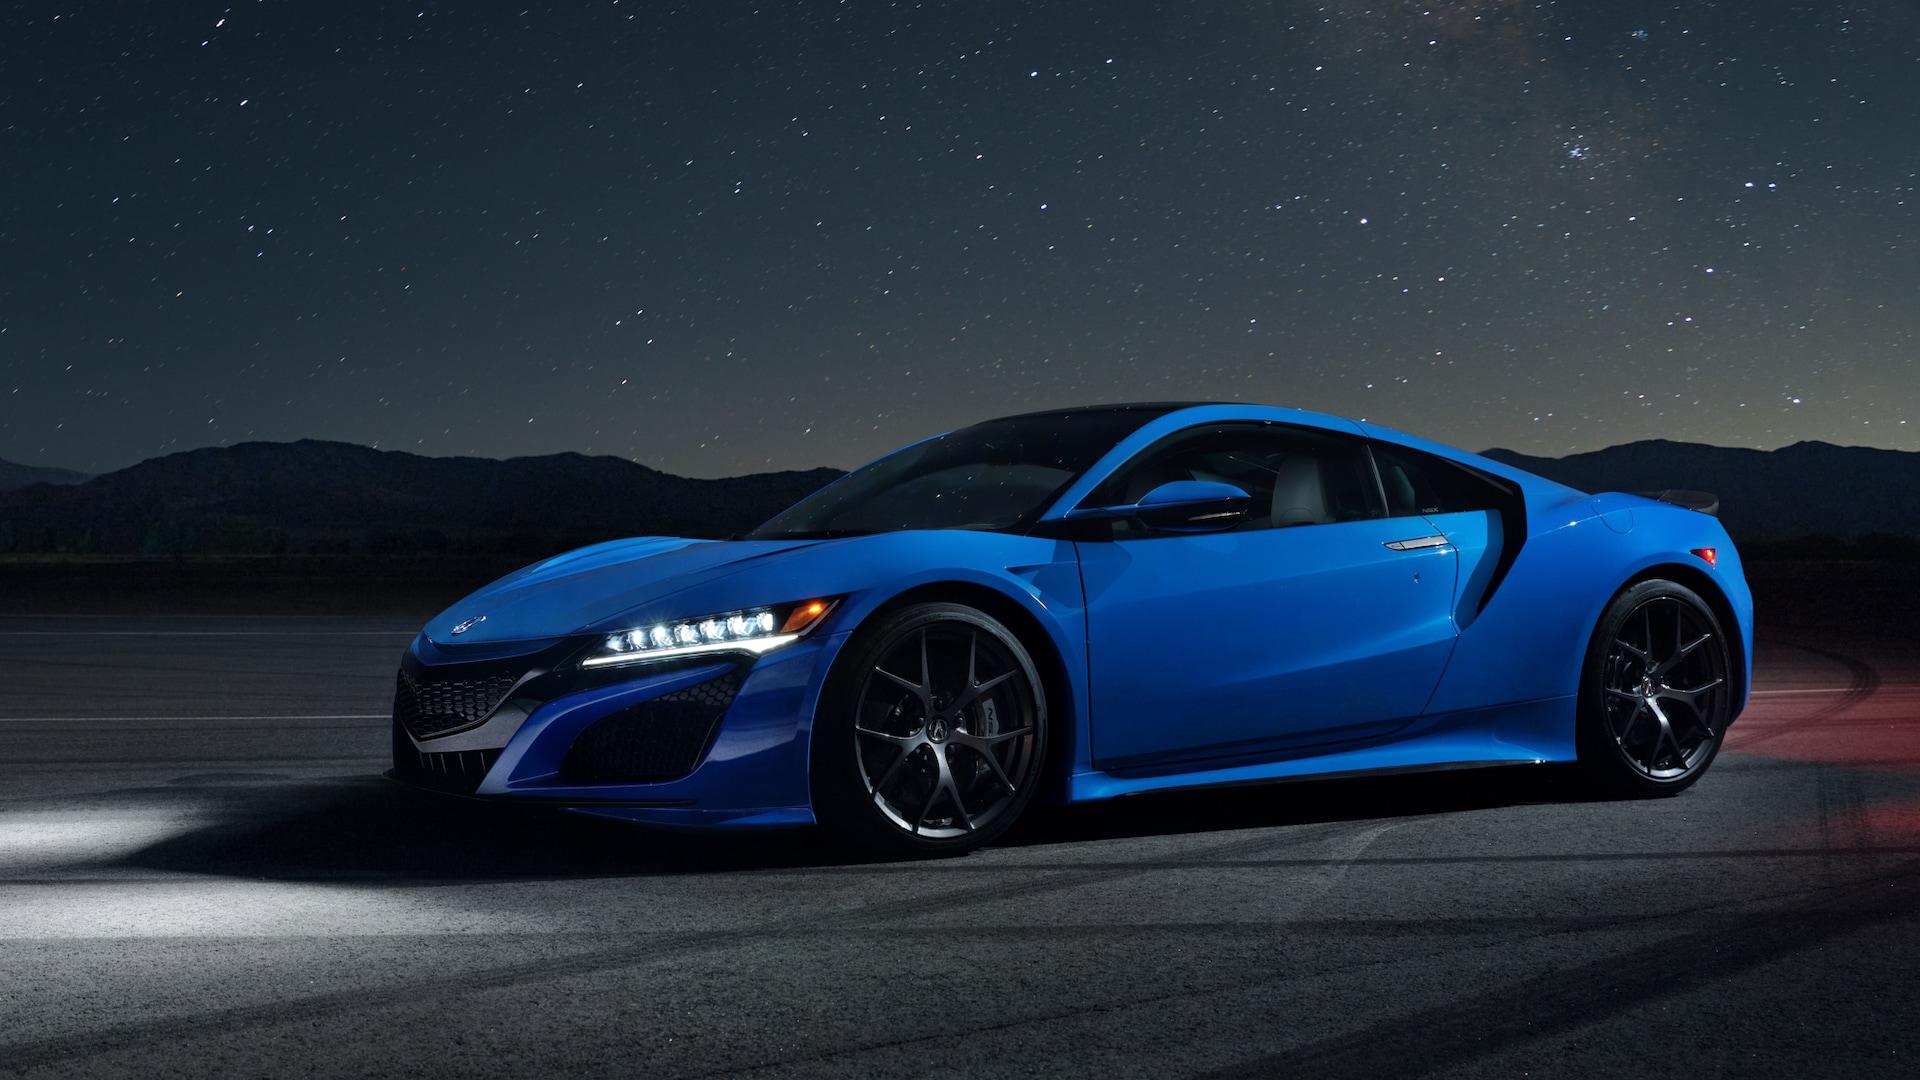 2021 Acura NSX Prices, Reviews, and Photos - MotorTrend